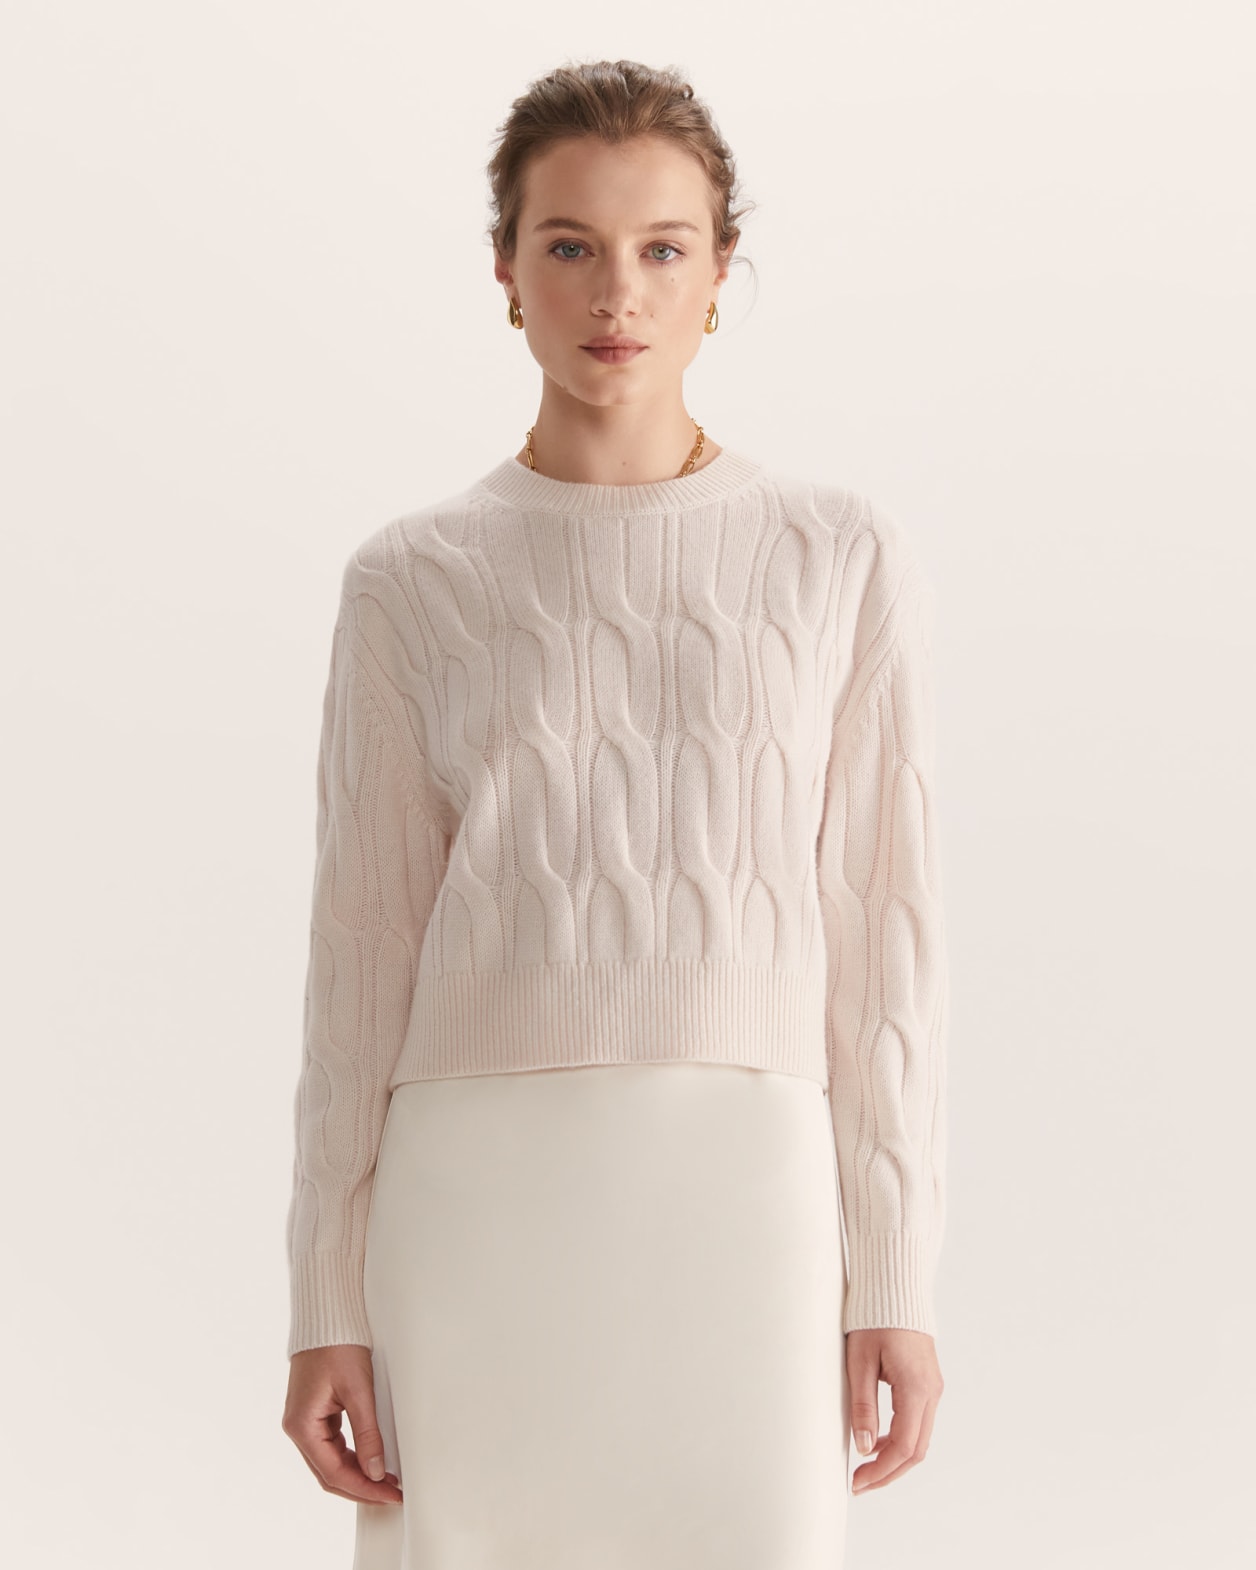 Nora Wool Cashmere Cropped Cable Sweater in CREAM